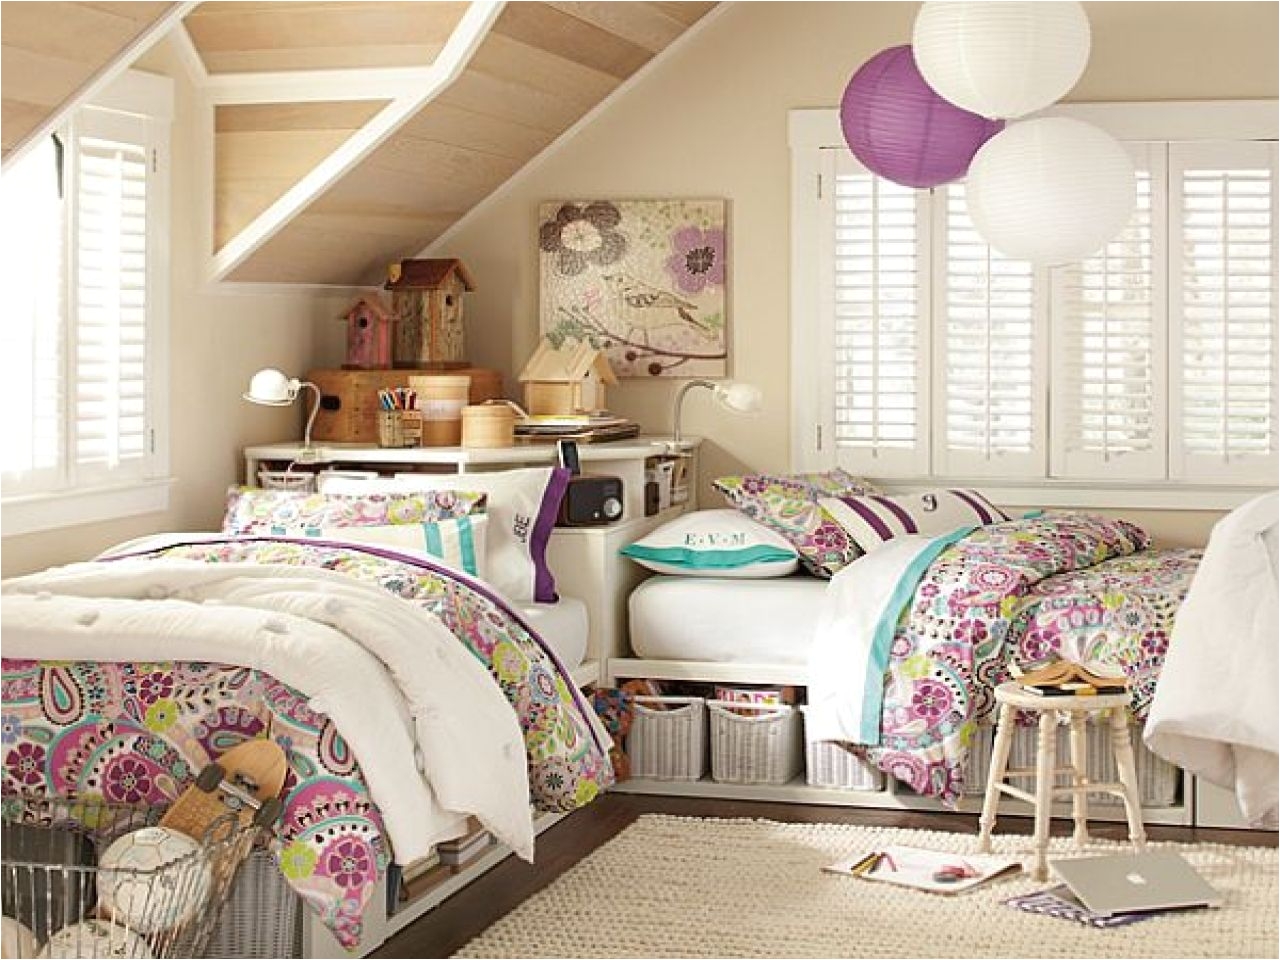 Small Bedroom Ideas For Sisters Two Girls Bedroom Ideas Small Bedroom Ideas For Sisters Two Girls